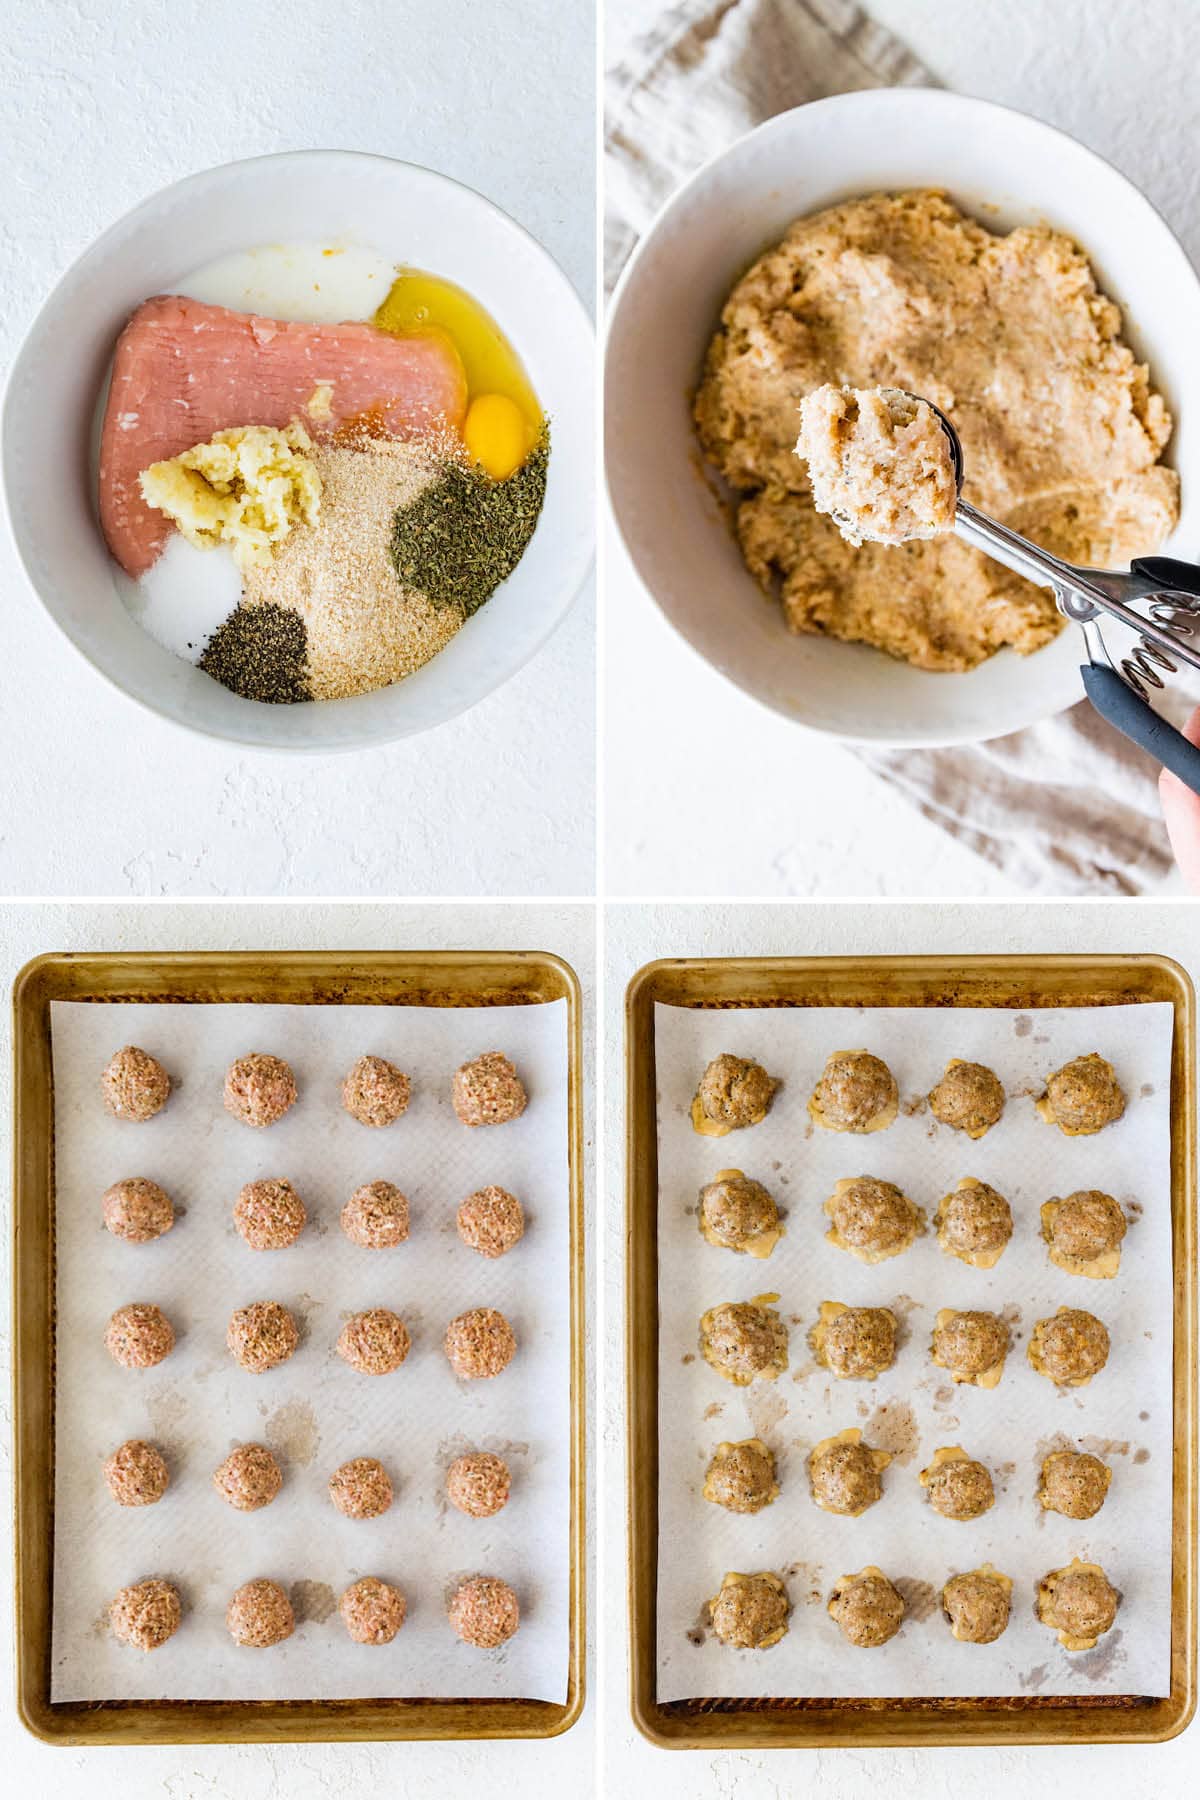 Collage of four photos showing how to make Baked Turkey Meatballs: mixing the turkey meatball mixture in a bowl, and then baking the meatballs on a baking sheet.